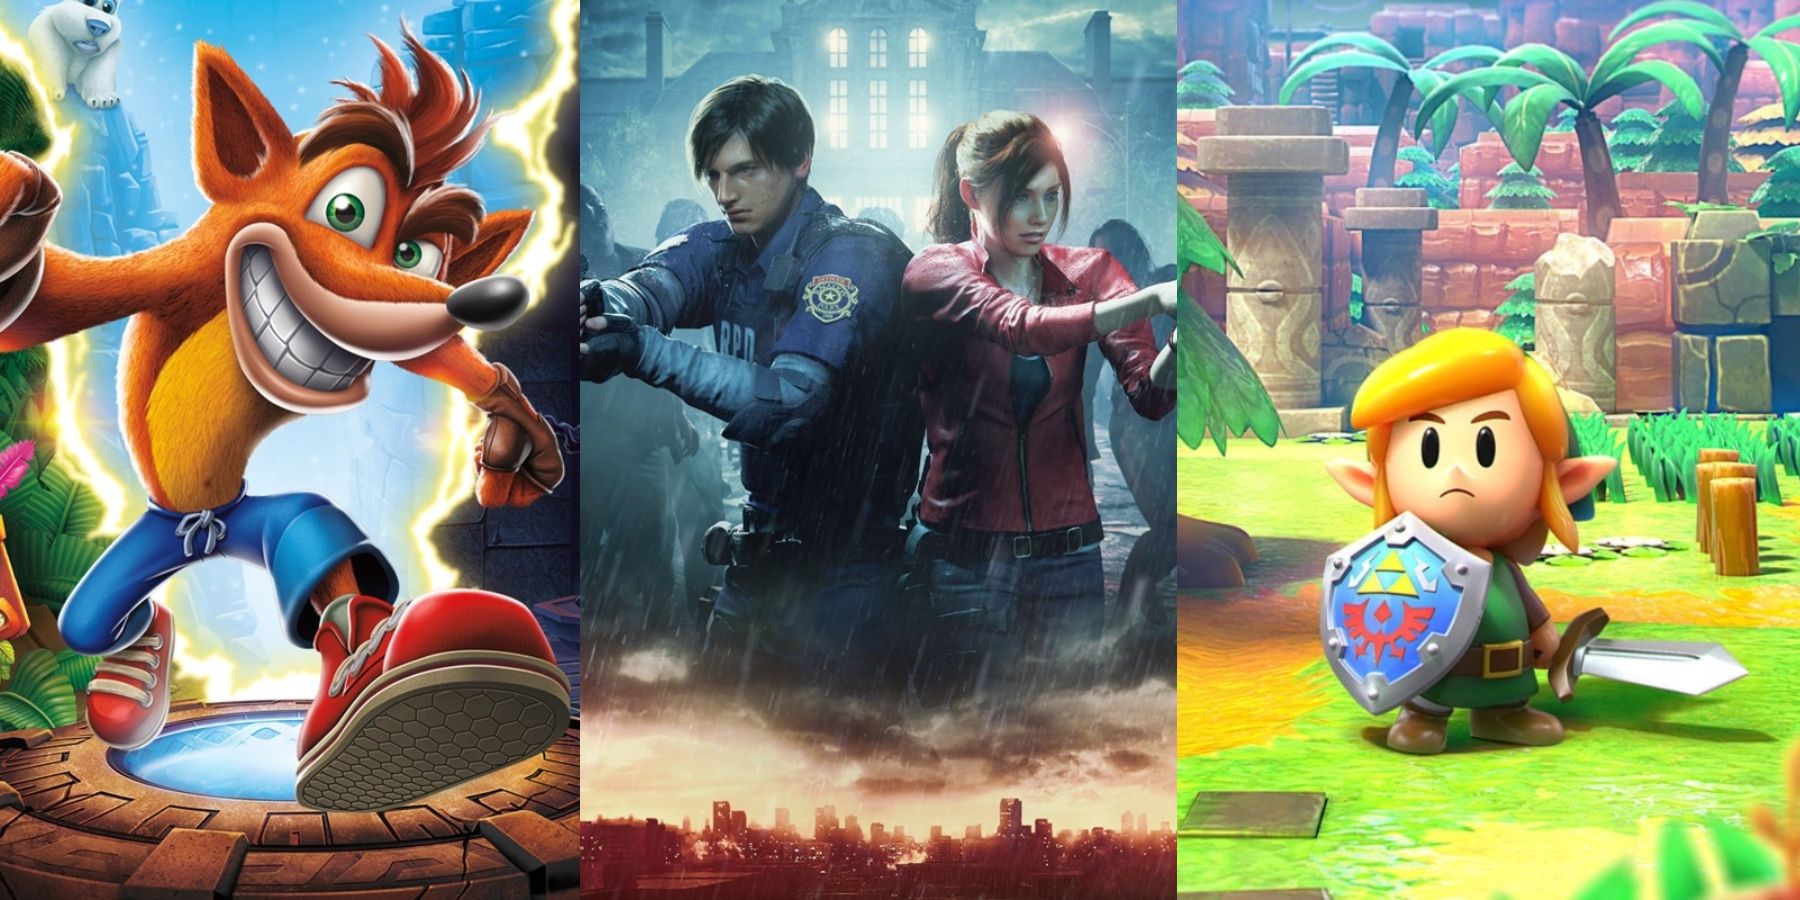 The 10 Best Video Game Remakes Of The Generation (According To Metacritic)